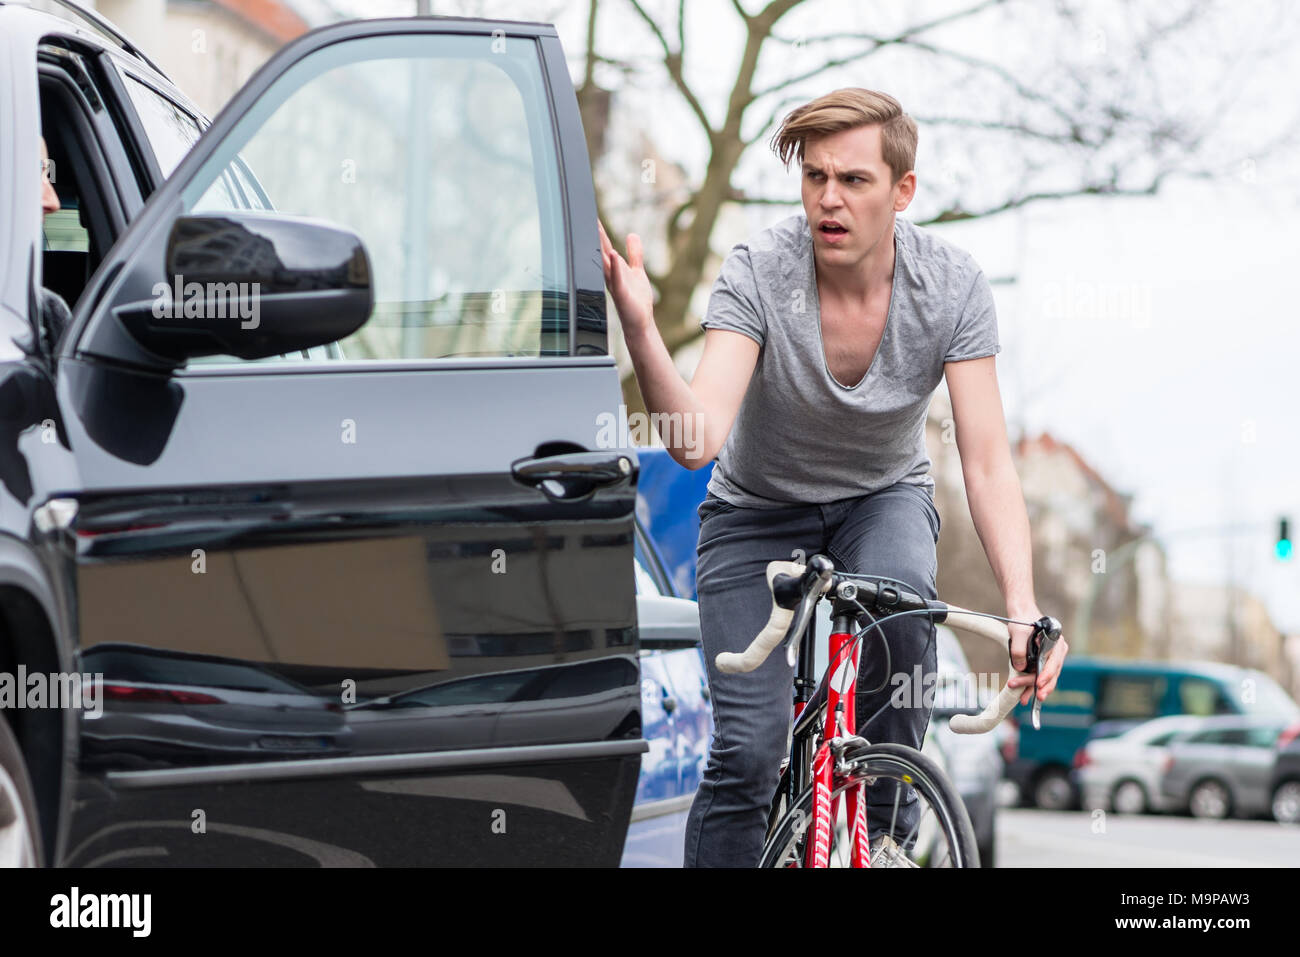 Young bicyclist shouting while swerving for avoiding dangerous collision Stock Photo